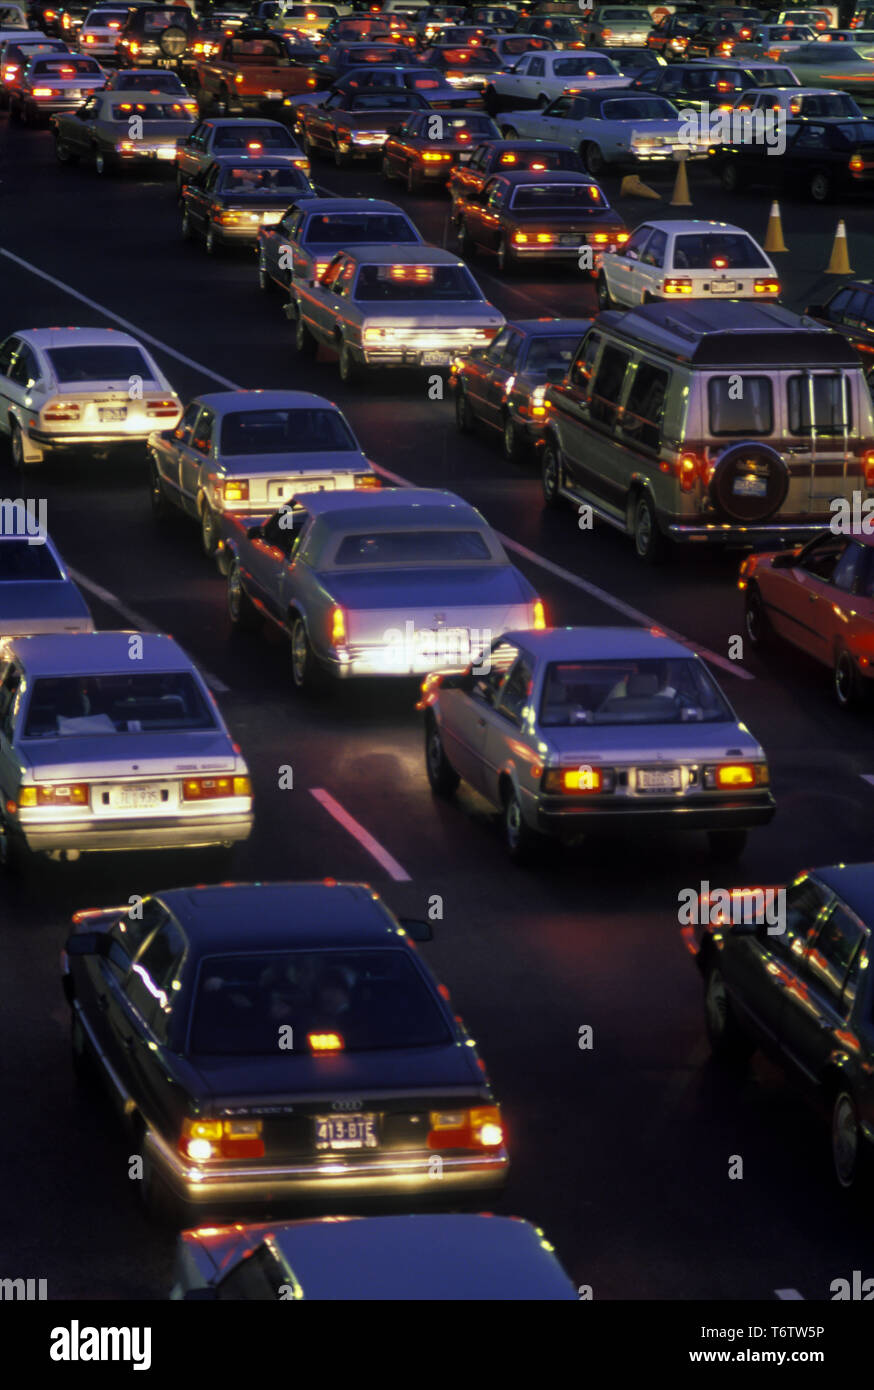 1988 HISTORICAL AUTOMOBILES WAITING IN LINES AT TOLL PLAZA GEORGE WASHINGTON BRIDGE NEW JERSEY USA Stock Photo